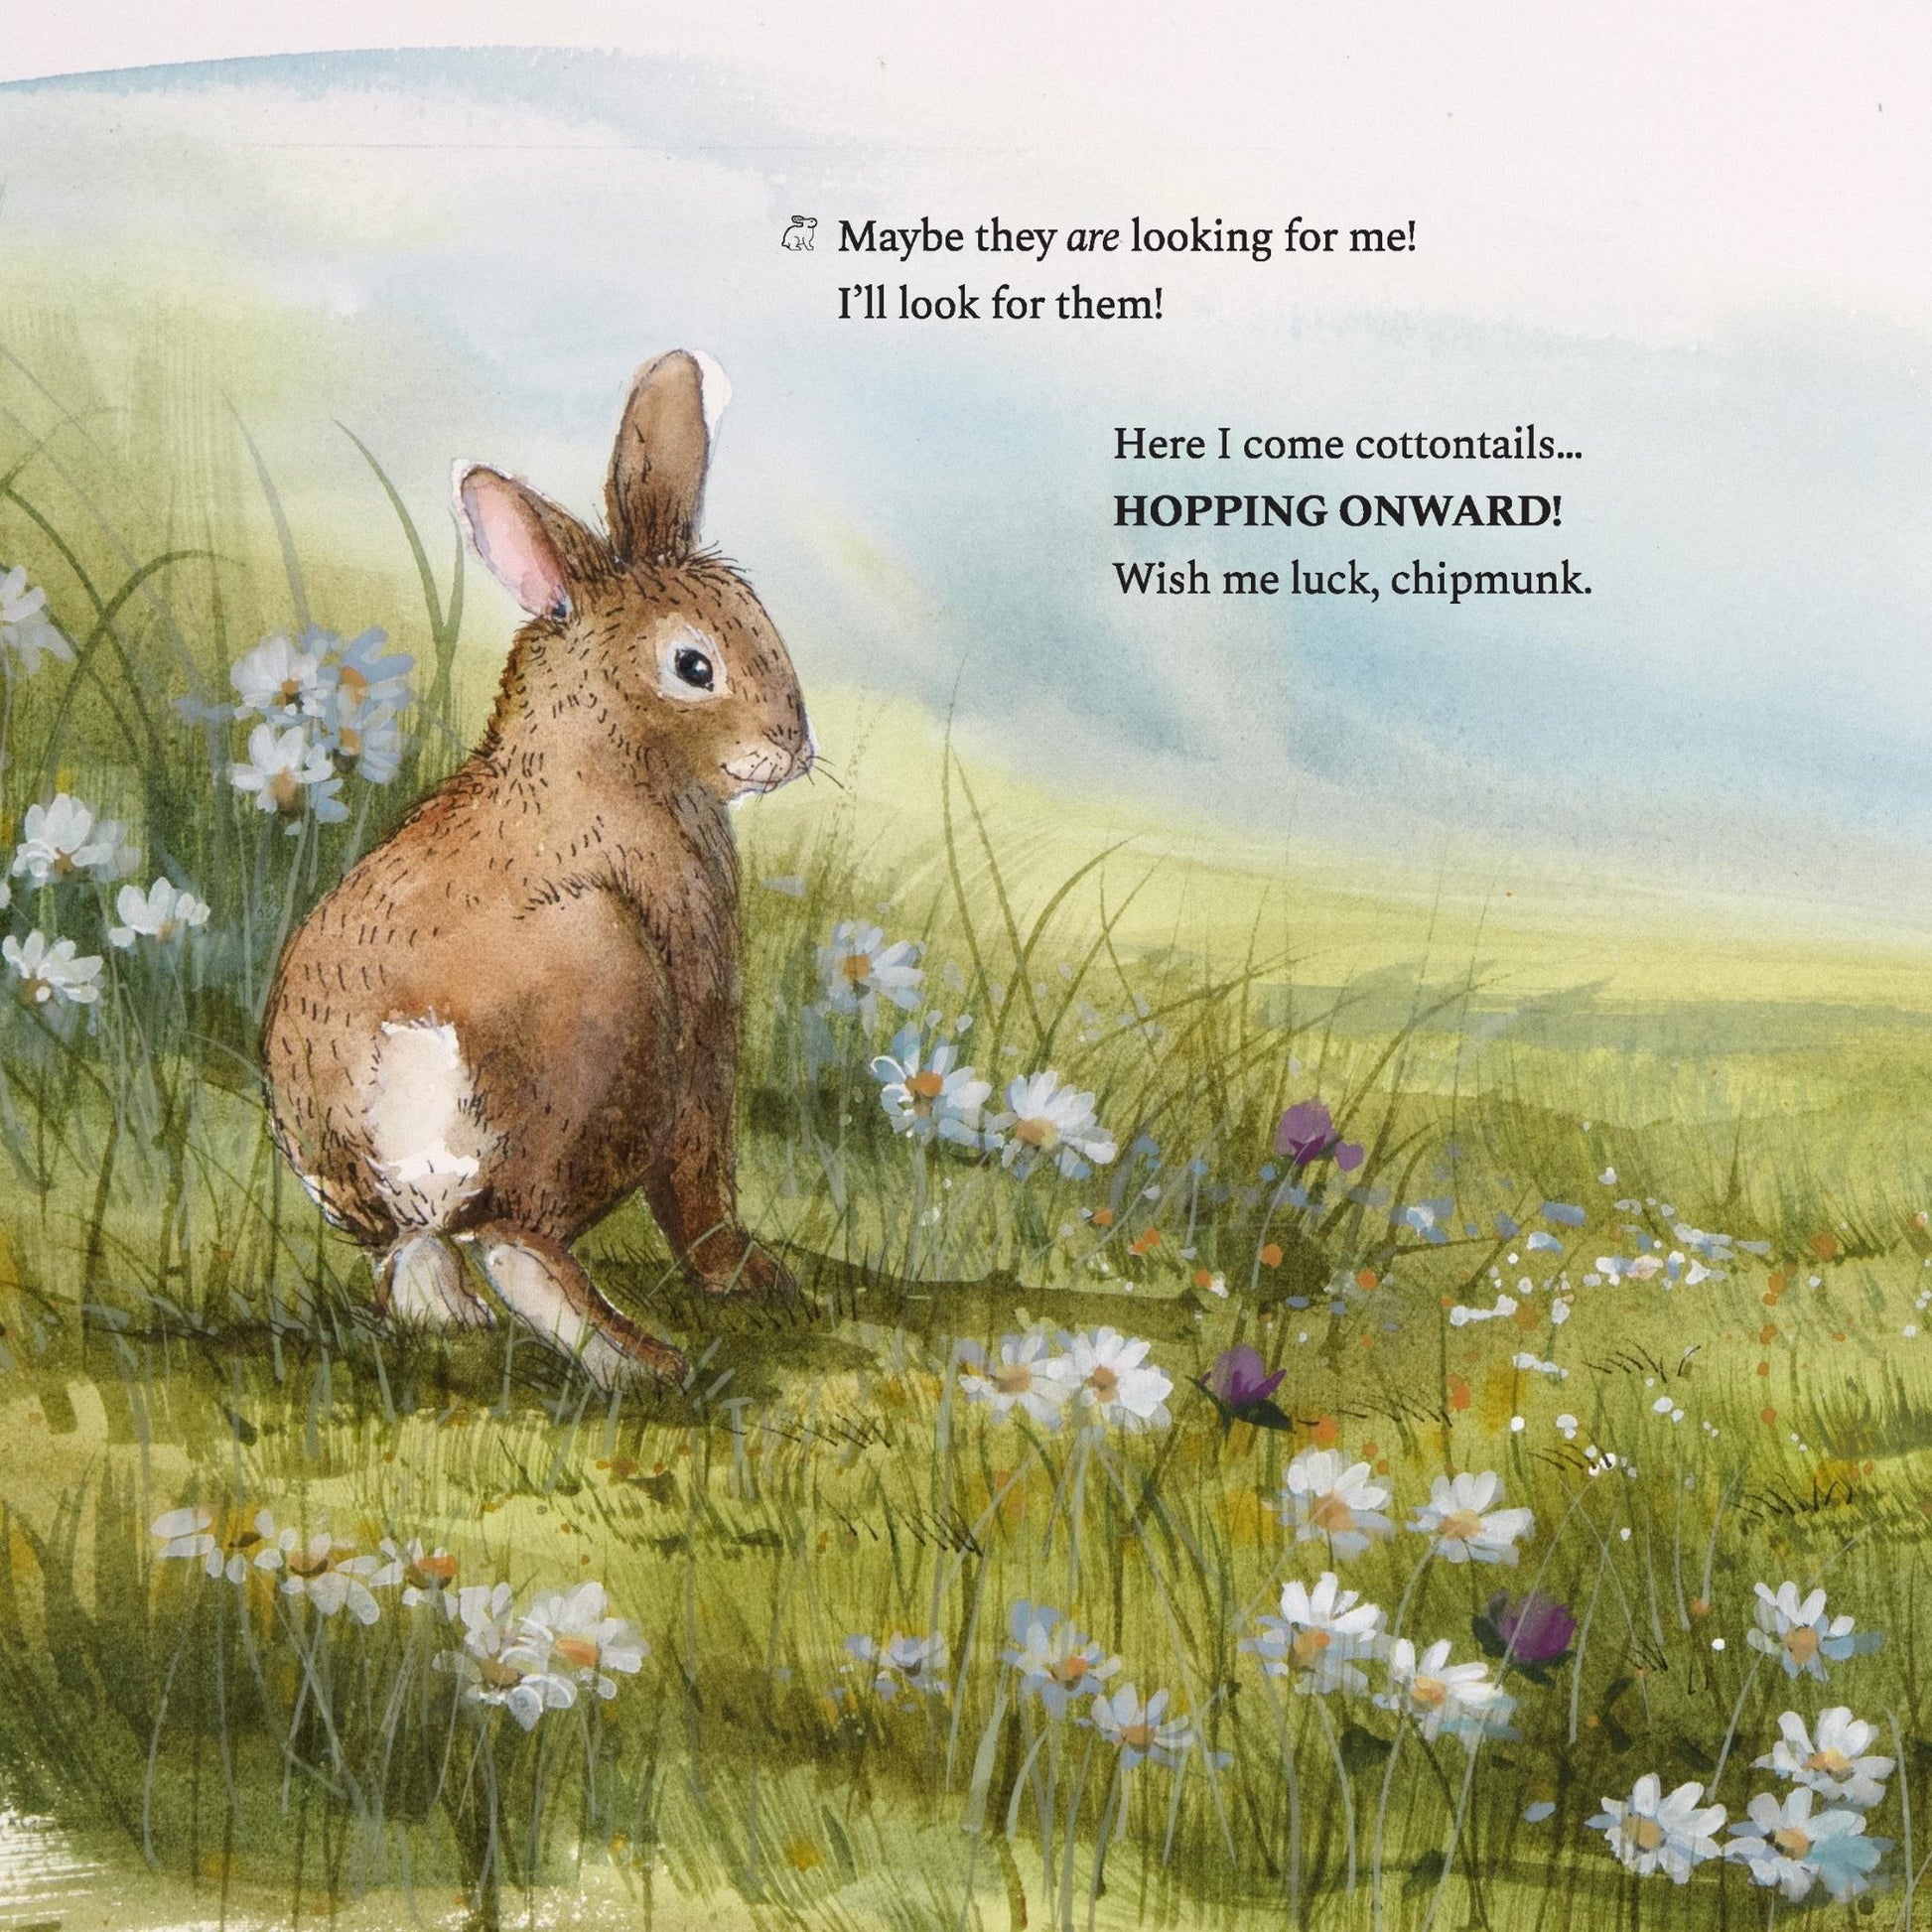 New England Cottontail Rabbit will hop onward, page from Hop Onward Rabbit Rabbit book